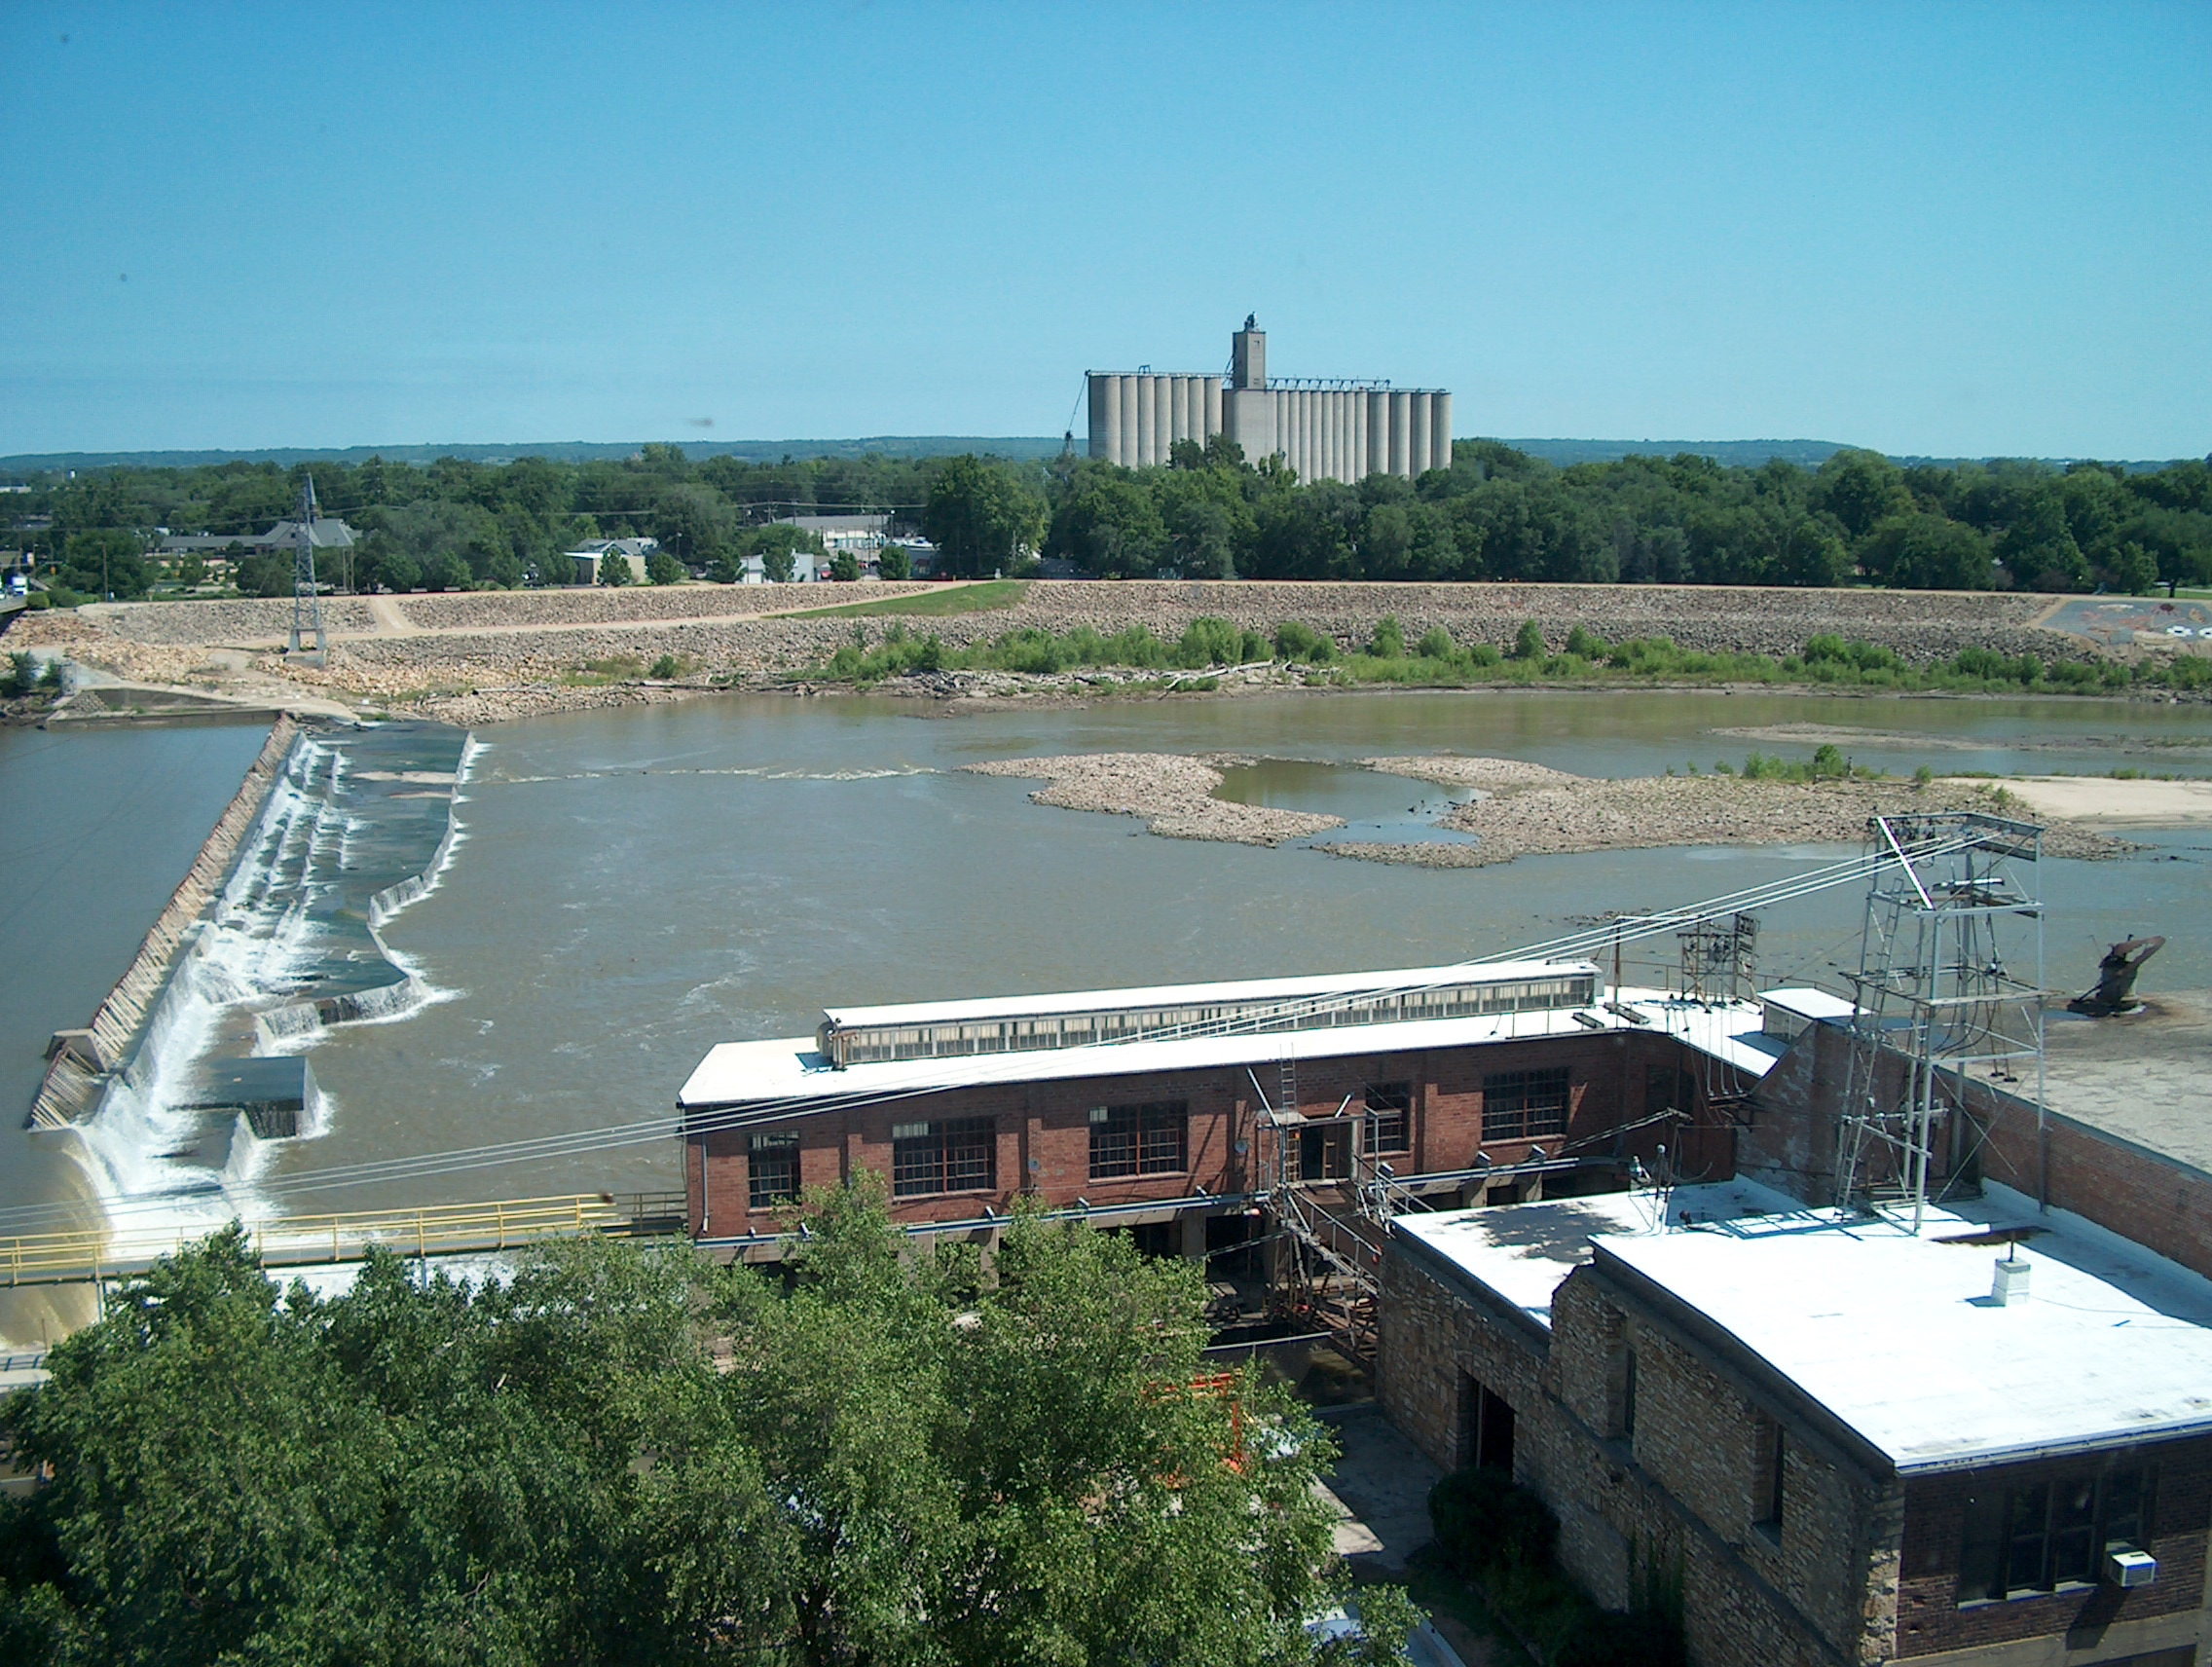 [Kaw (Kansas) River from City Hall fourth floor.]